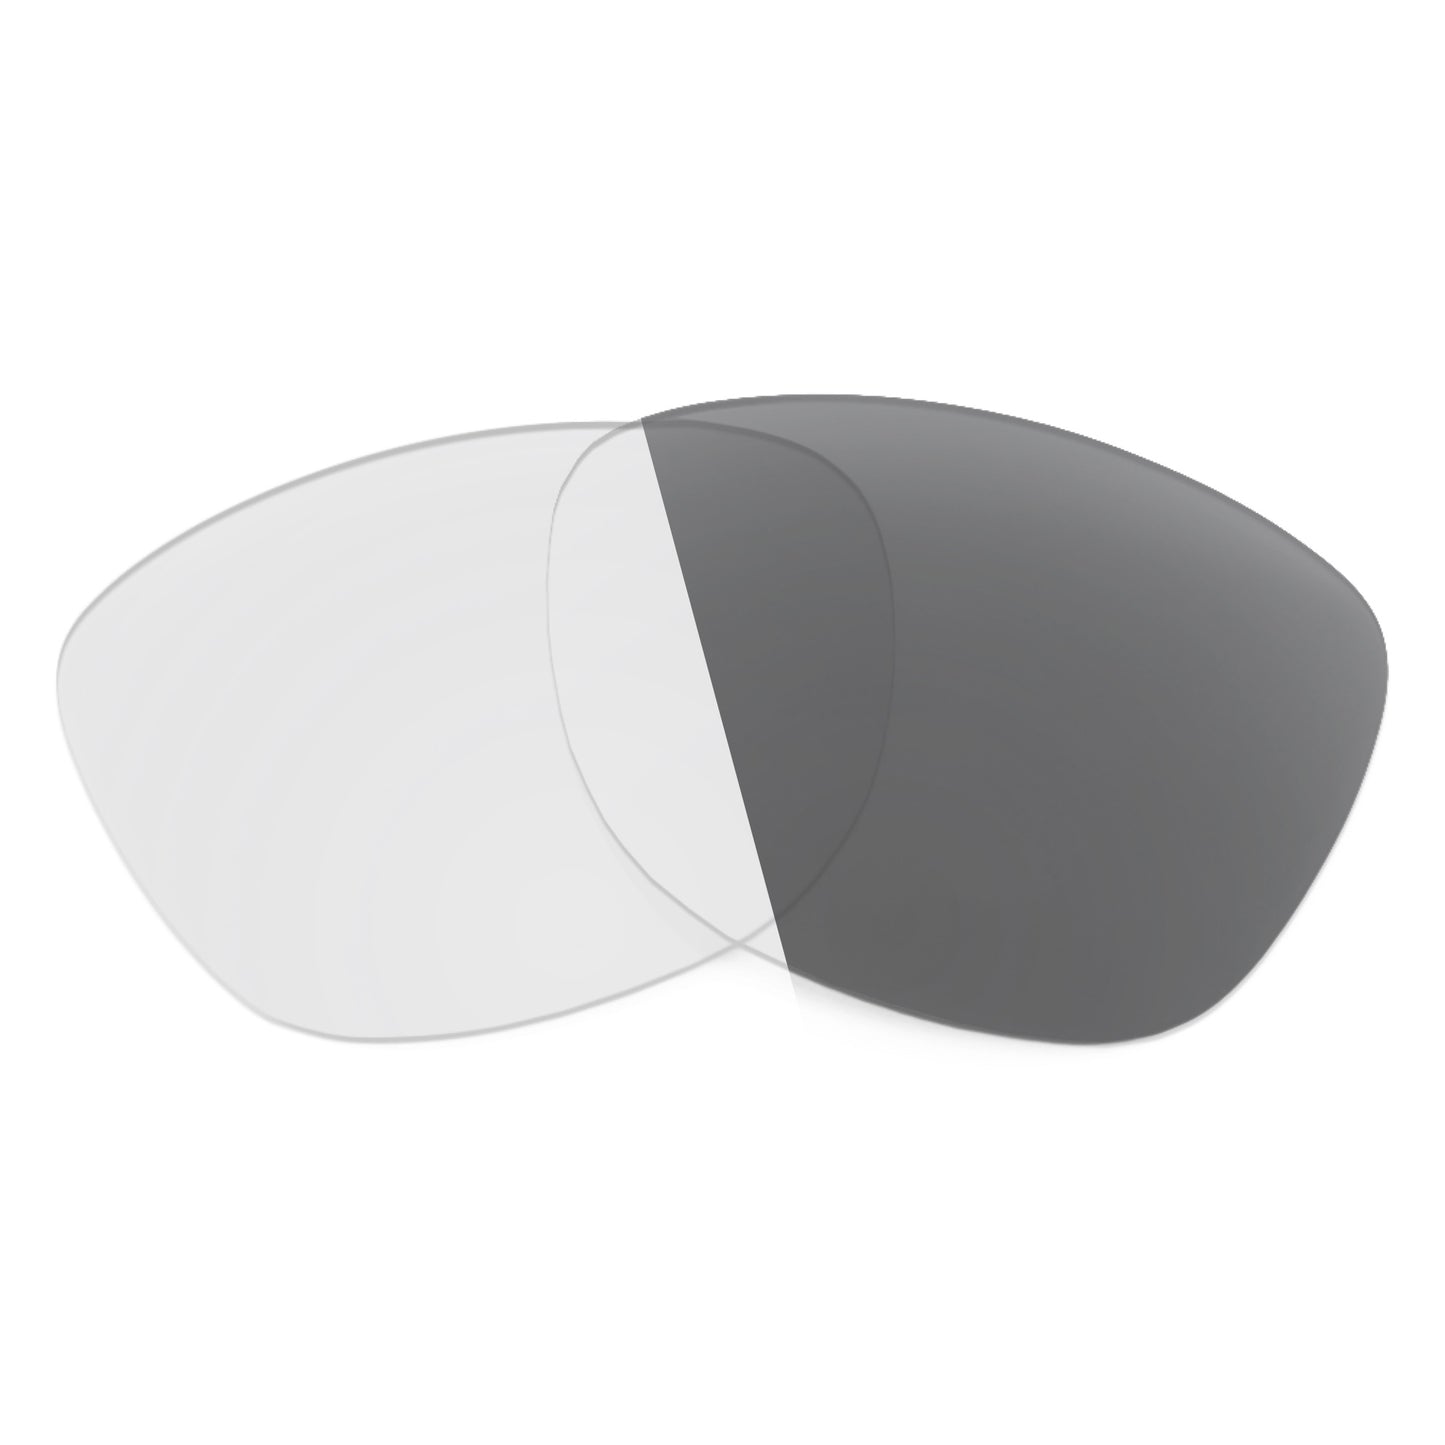 Revant replacement lenses for Oakley Frogskins LX (Low Bridge Fit) Non-Polarized Adapt Gray Photochromic